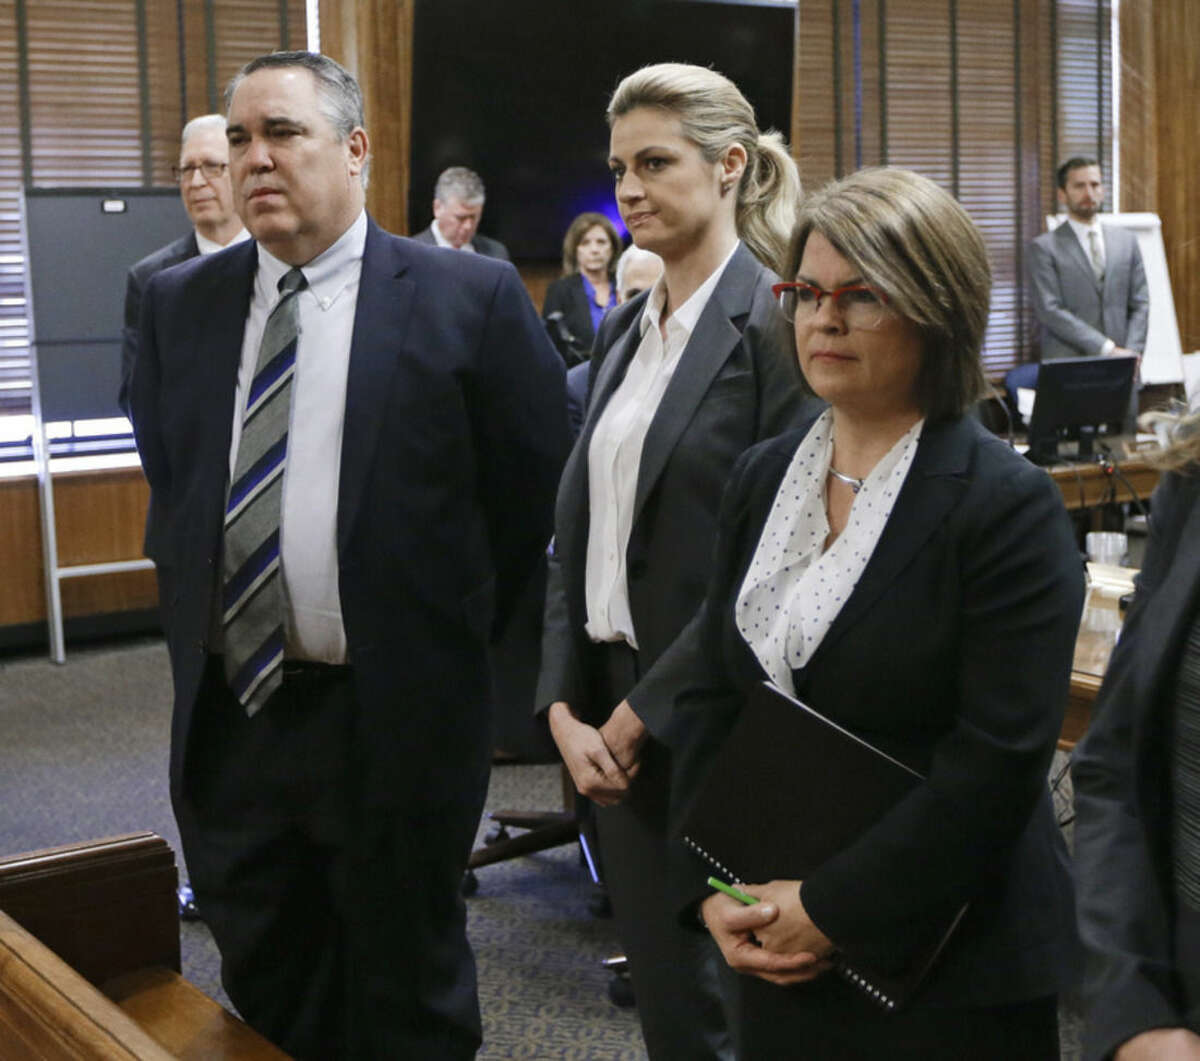 Sportscaster and television host Erin Andrews, center, stands with attorney Scott Carr, left, as the jury enters the courtroom Monday, March 7, 2016, in Nashville, Tenn. Andrews' $75 million lawsuit against the franchise owner and manager of a luxury hotel and a man who admitted to making secret nude recordings of her in 2008 was turned over to the jury Monday. (AP Photo/Mark Humphrey, Pool)